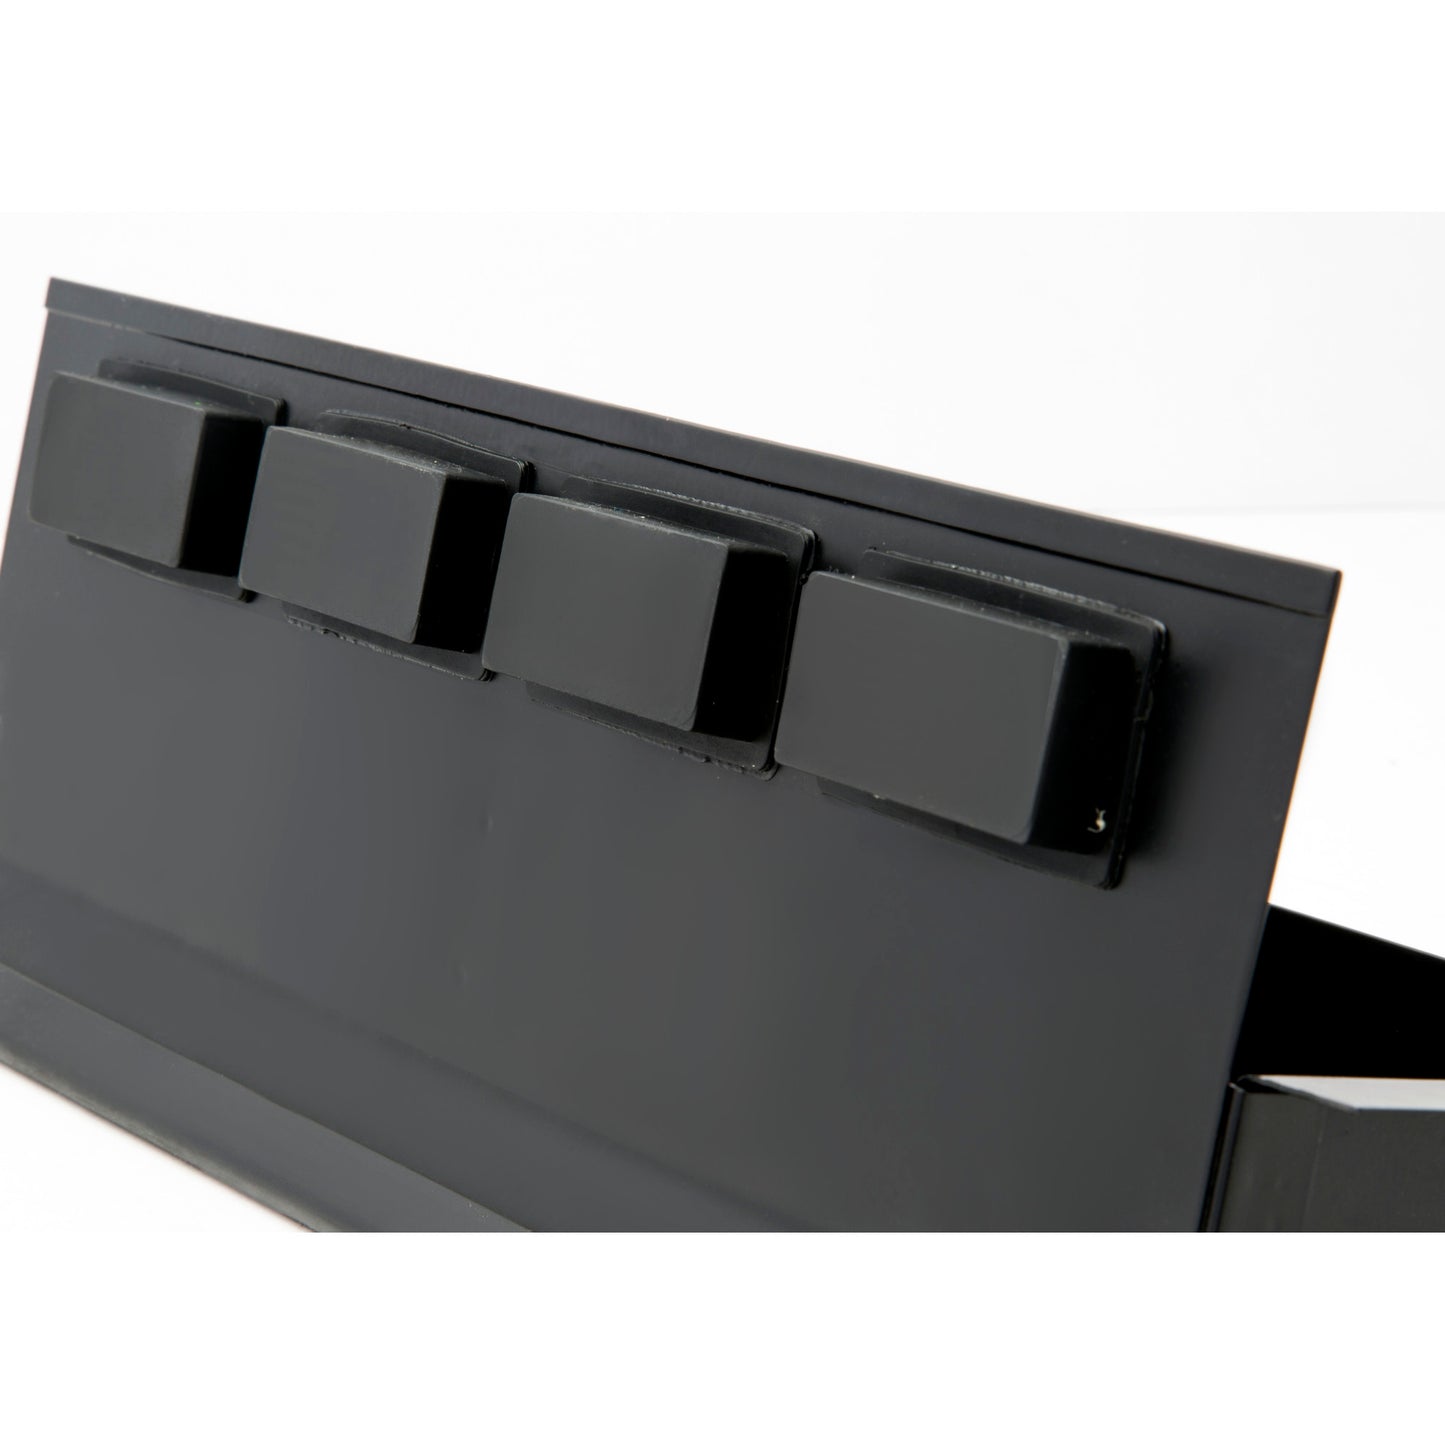 6-holder 7-pound Capacity Magnetic Parts Tray